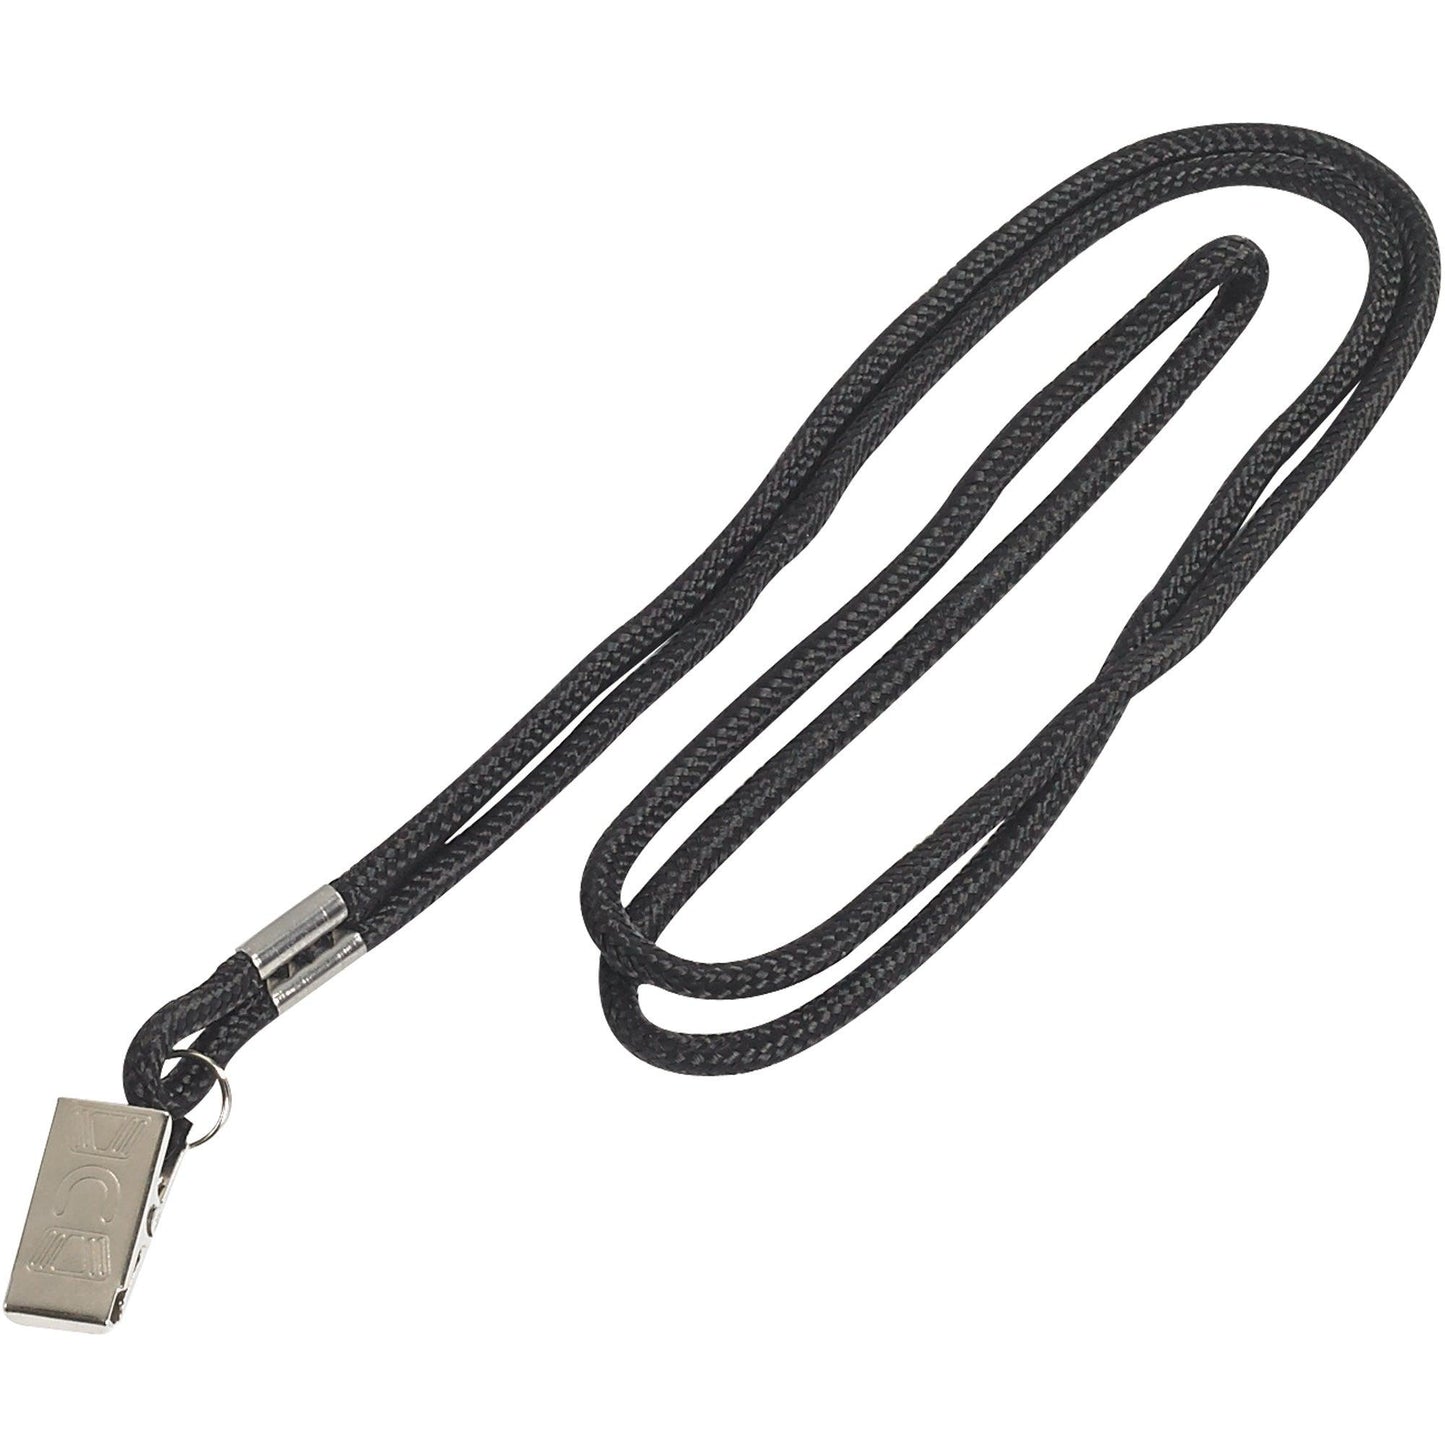 Standard Black Lanyard with Clip - LY110